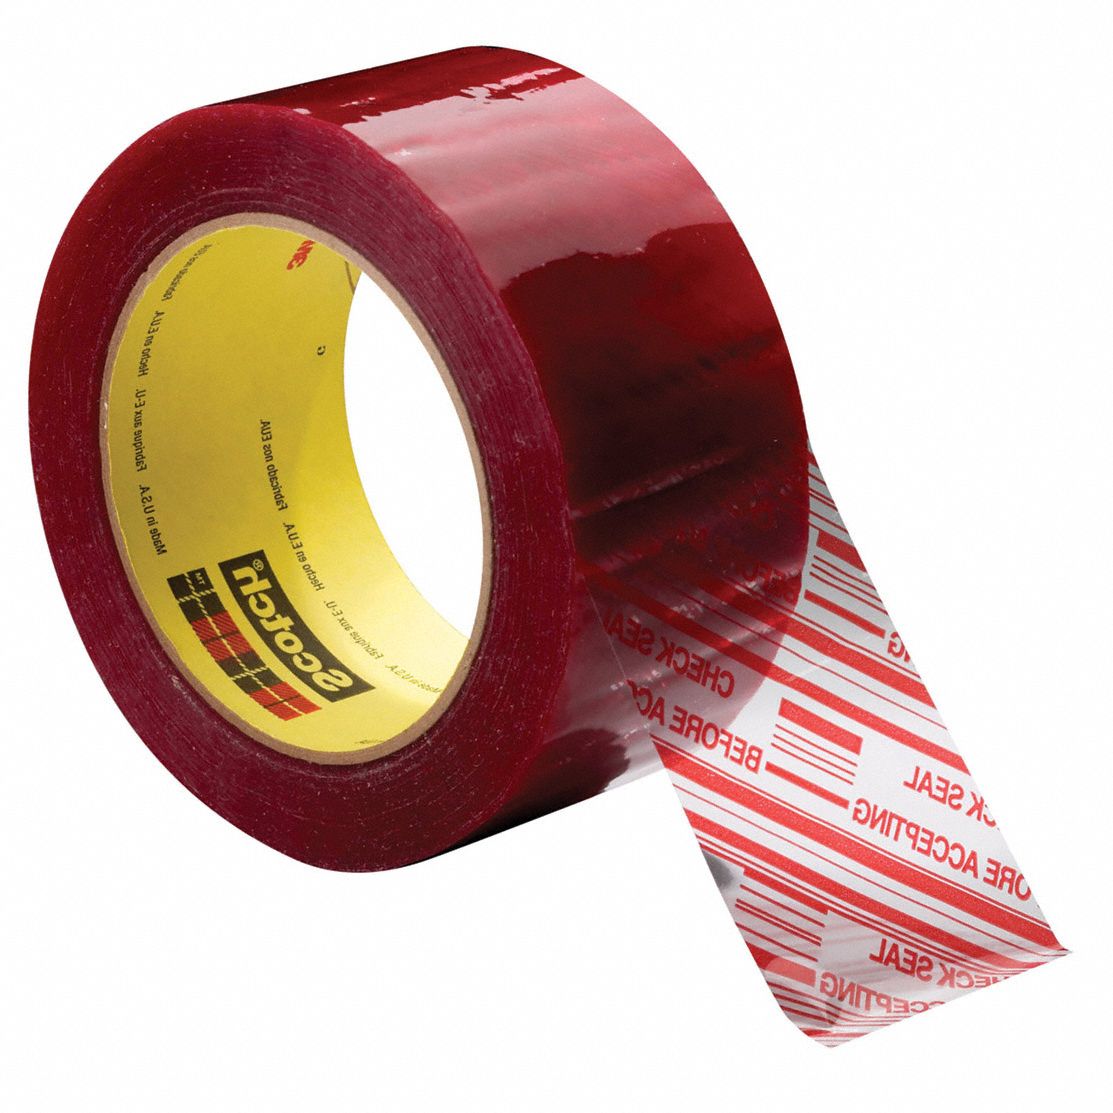 3M Security Tape Tamper Evident 2" x 1000 yds. Box Sealing Scotch 3779 